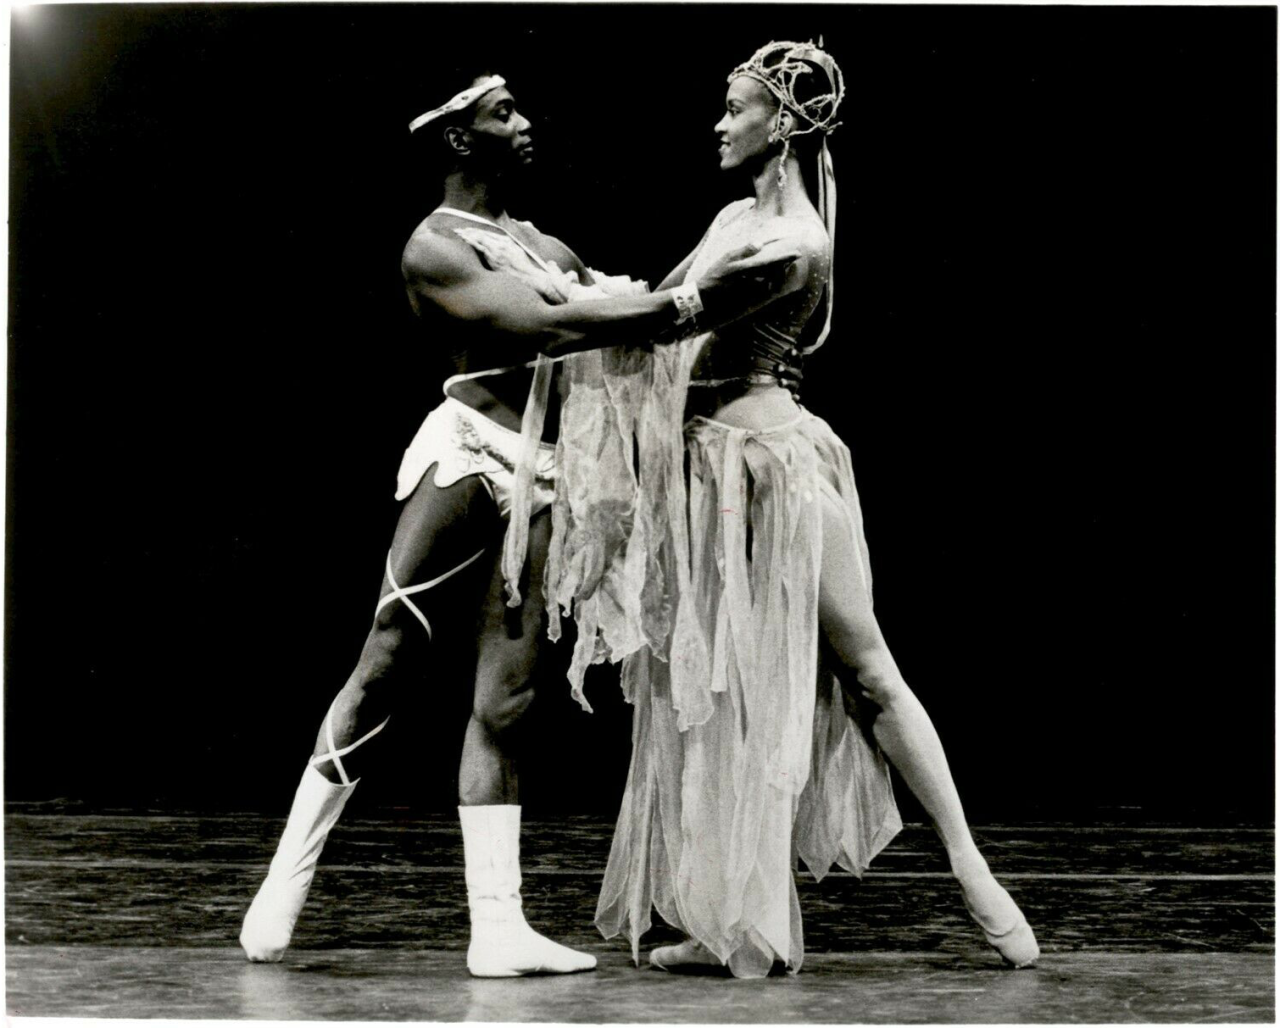 swanlake1998:
“ronald perry and lorraine graves photographed performing as prince ivan and the princess of unreal beauty in john taras’ the firebird by martha swope
”